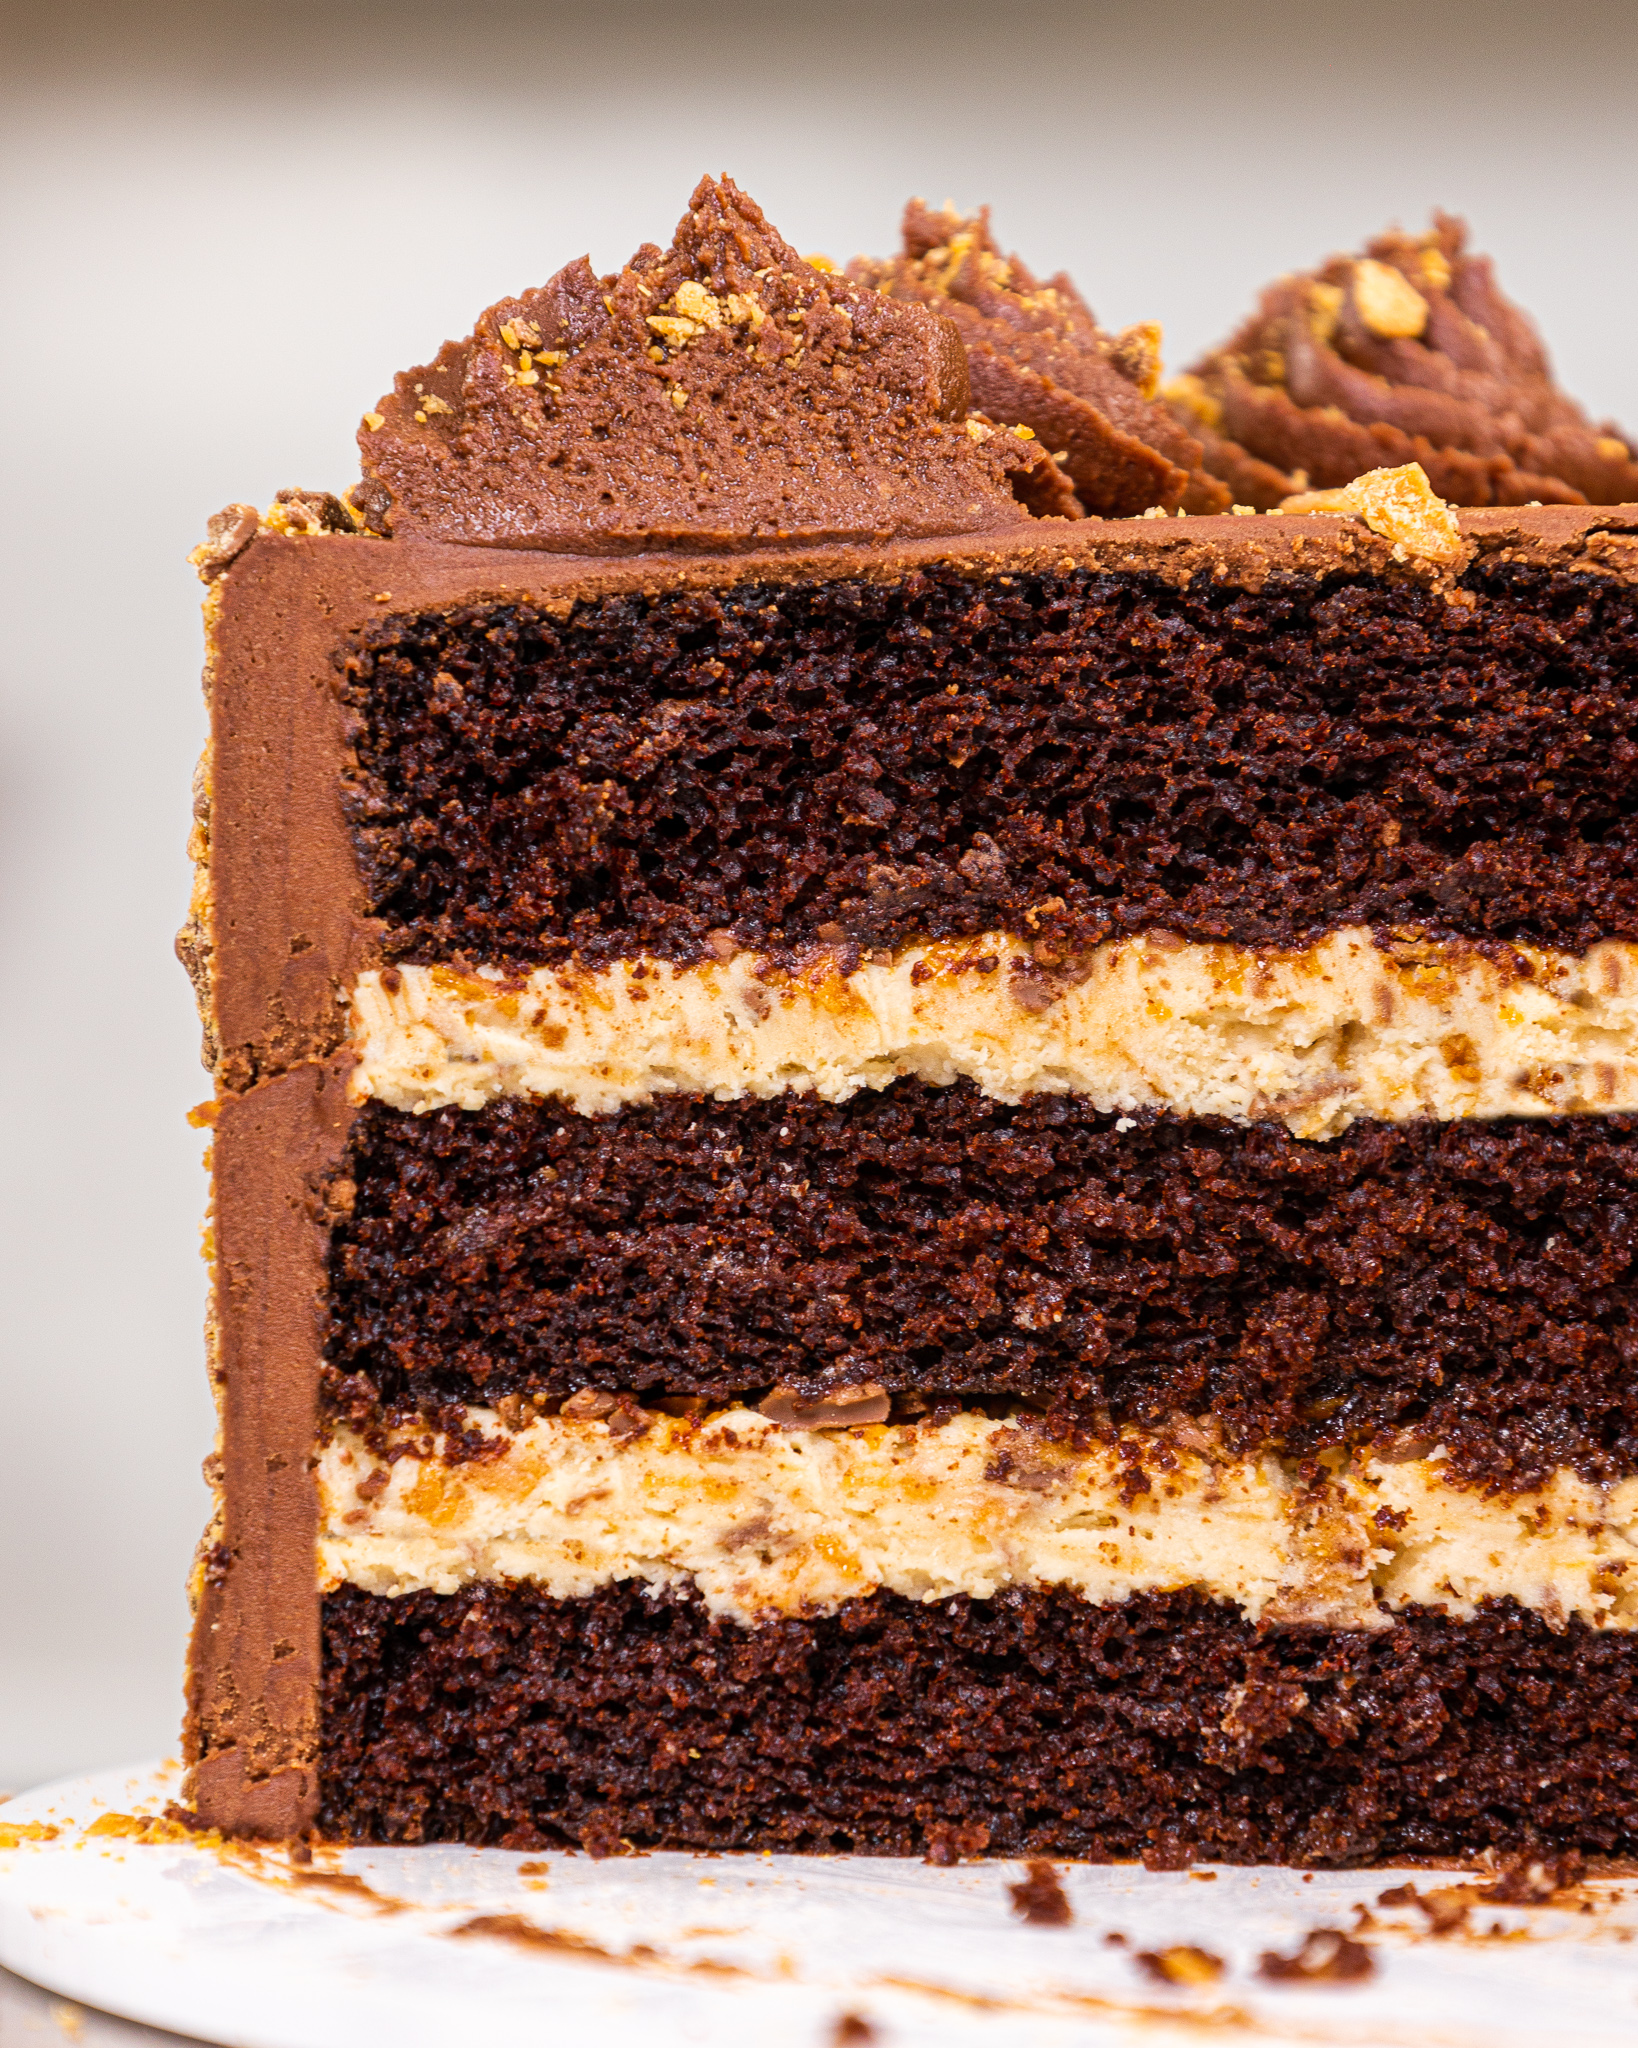 image of a butterfinger cake that's been cut into to show its crunchy peanut butter butterfinger filling and tender chocolate cake layers